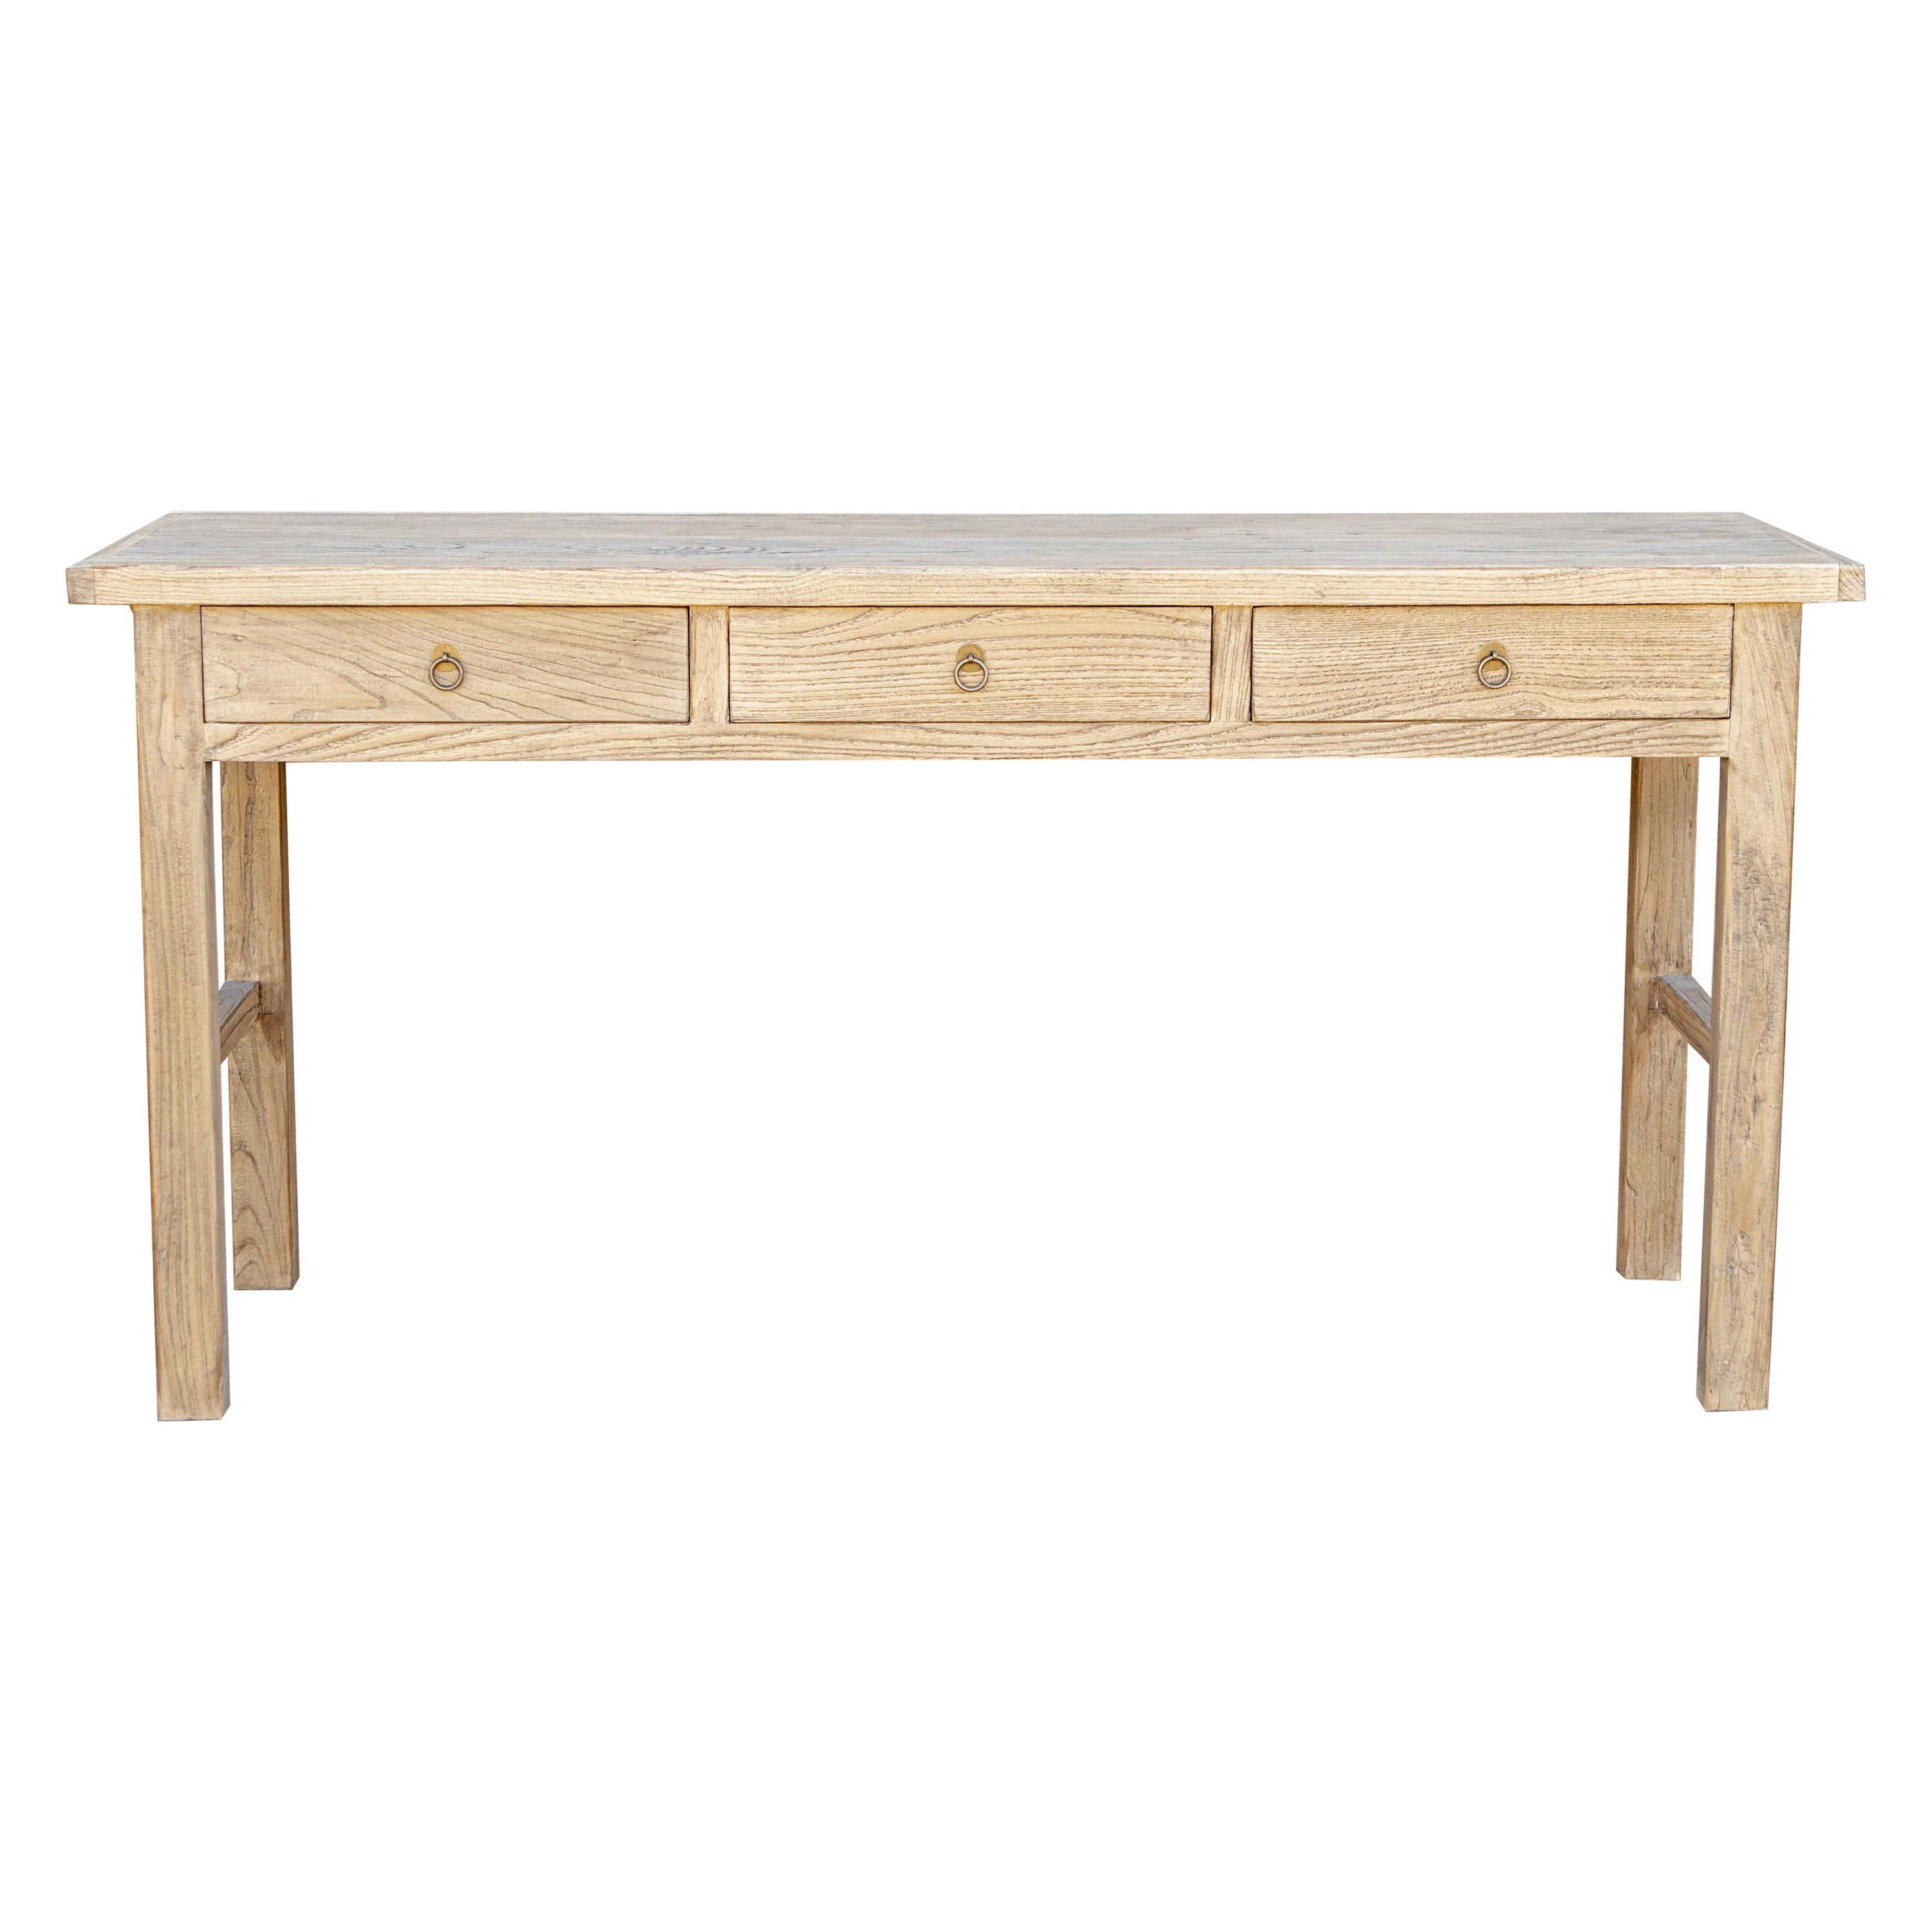 Franklin console table